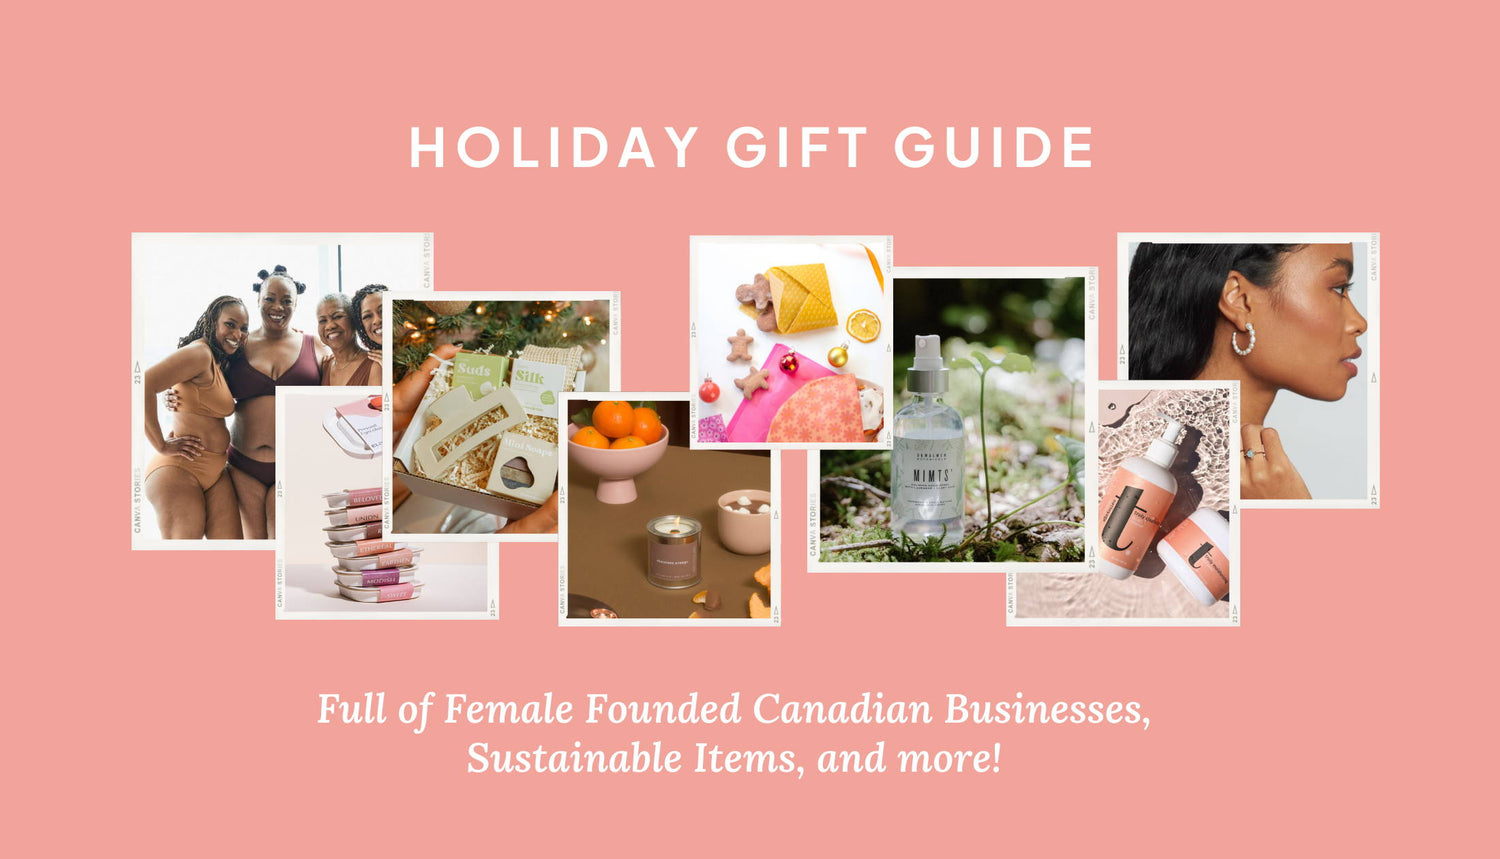 Female Founded Small Business Gift Guide for this Holiday Season